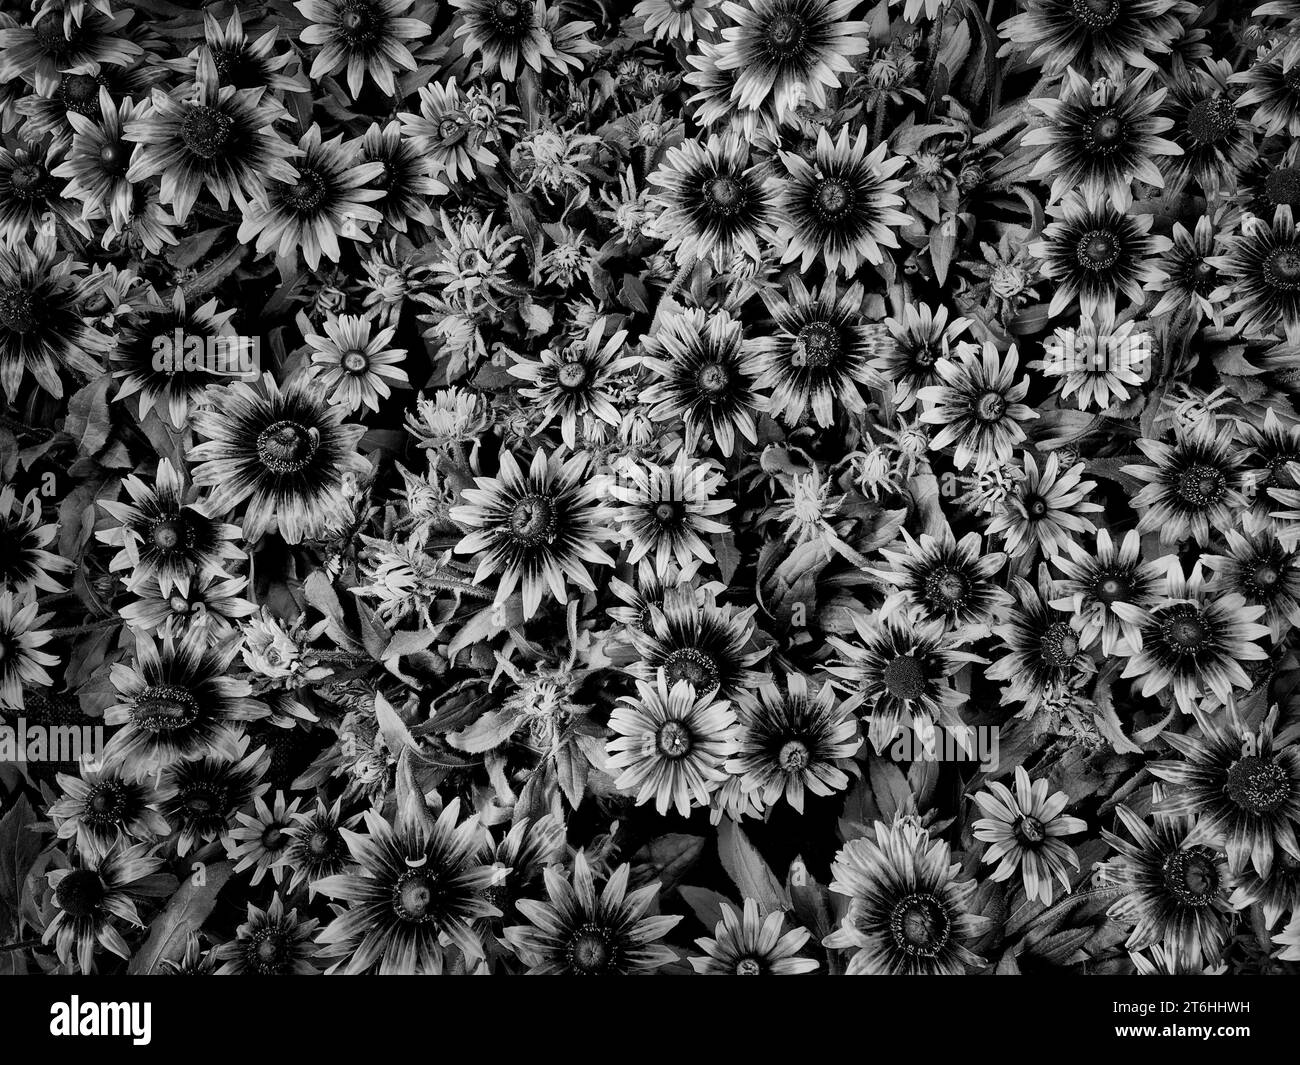 A black and white photograph of an array of various flowers in full bloom, standing together in a vibrant and colorful display Stock Photo